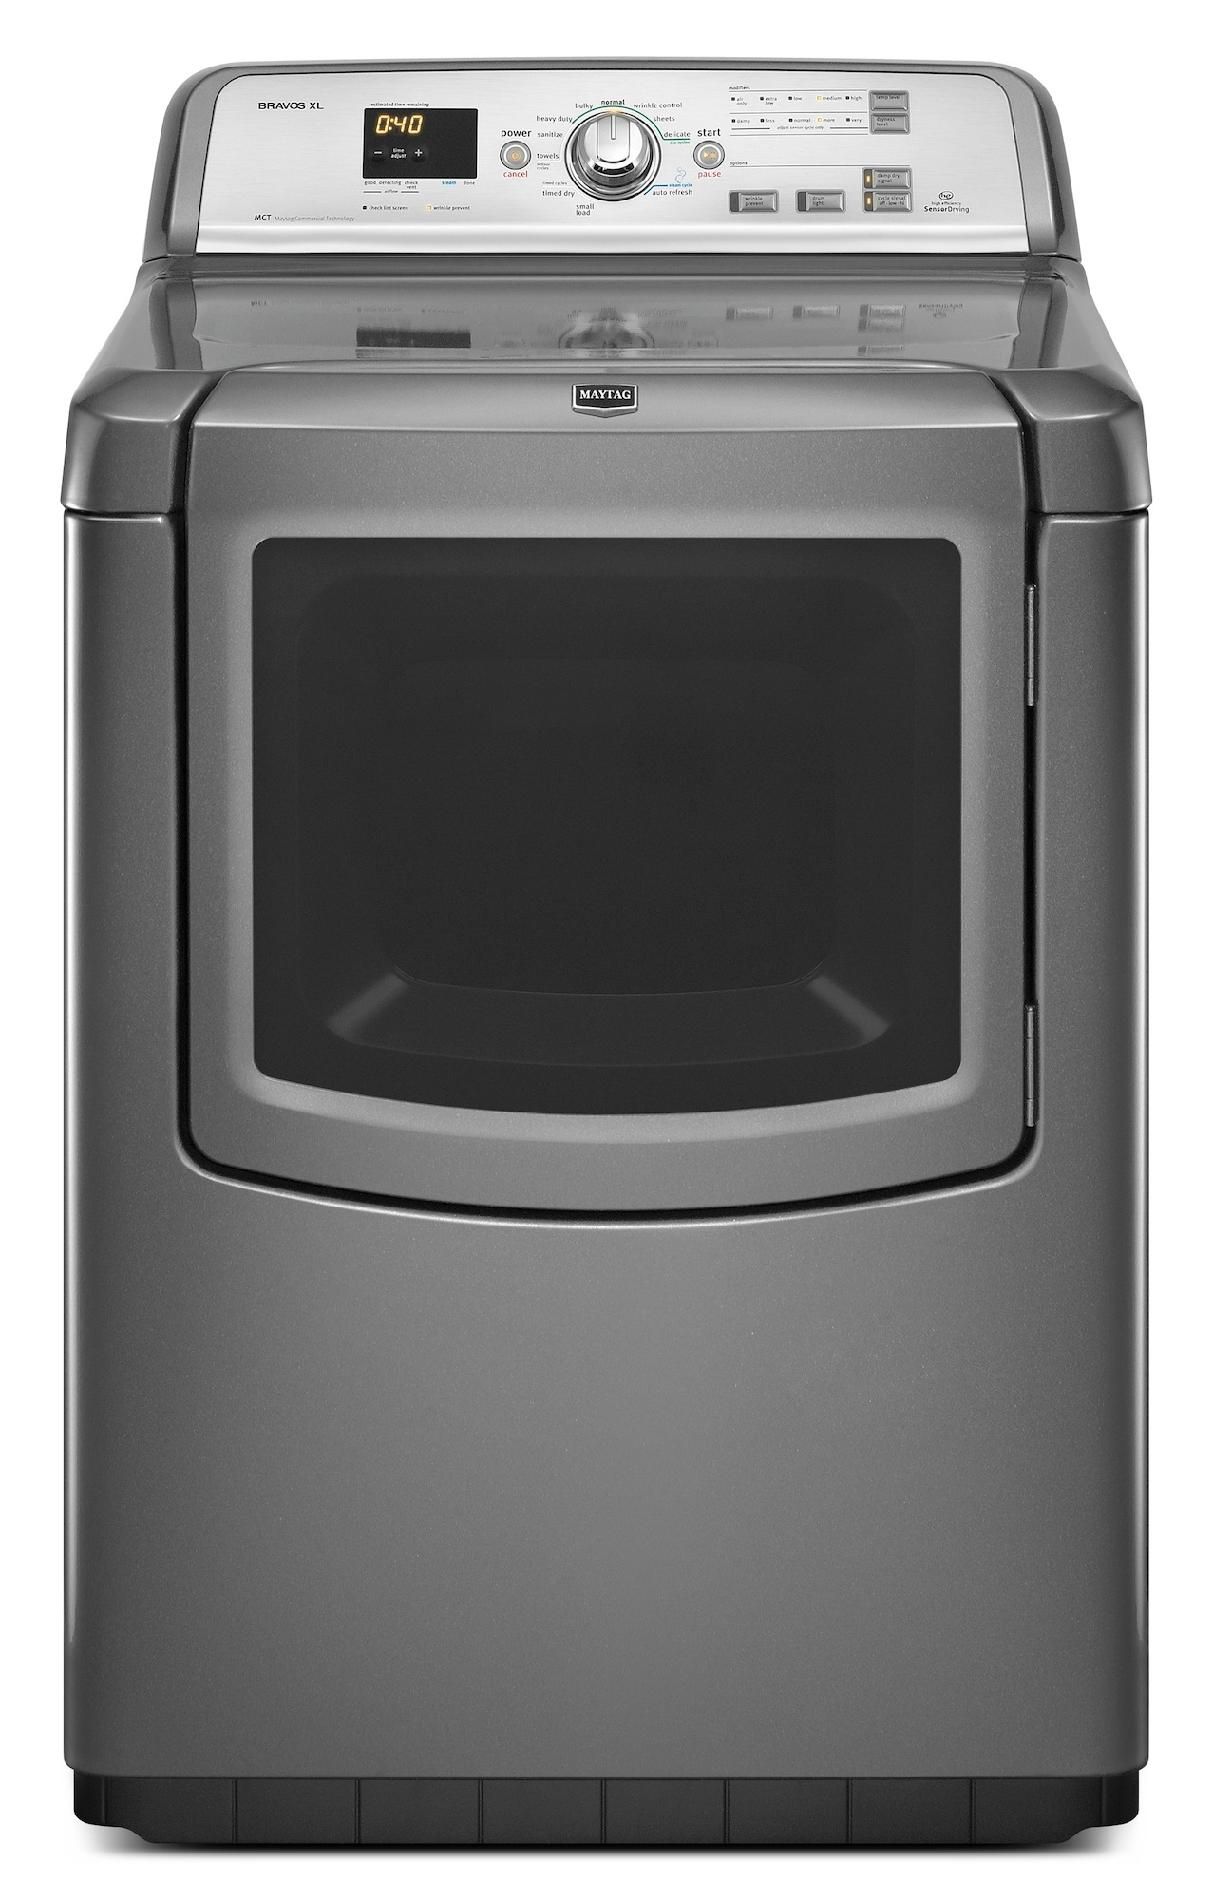 Maytag 7.3 cu. ft. Bravos XL Steam Electric Dryer - Granite Metallic 7.0 cu. ft. and greater